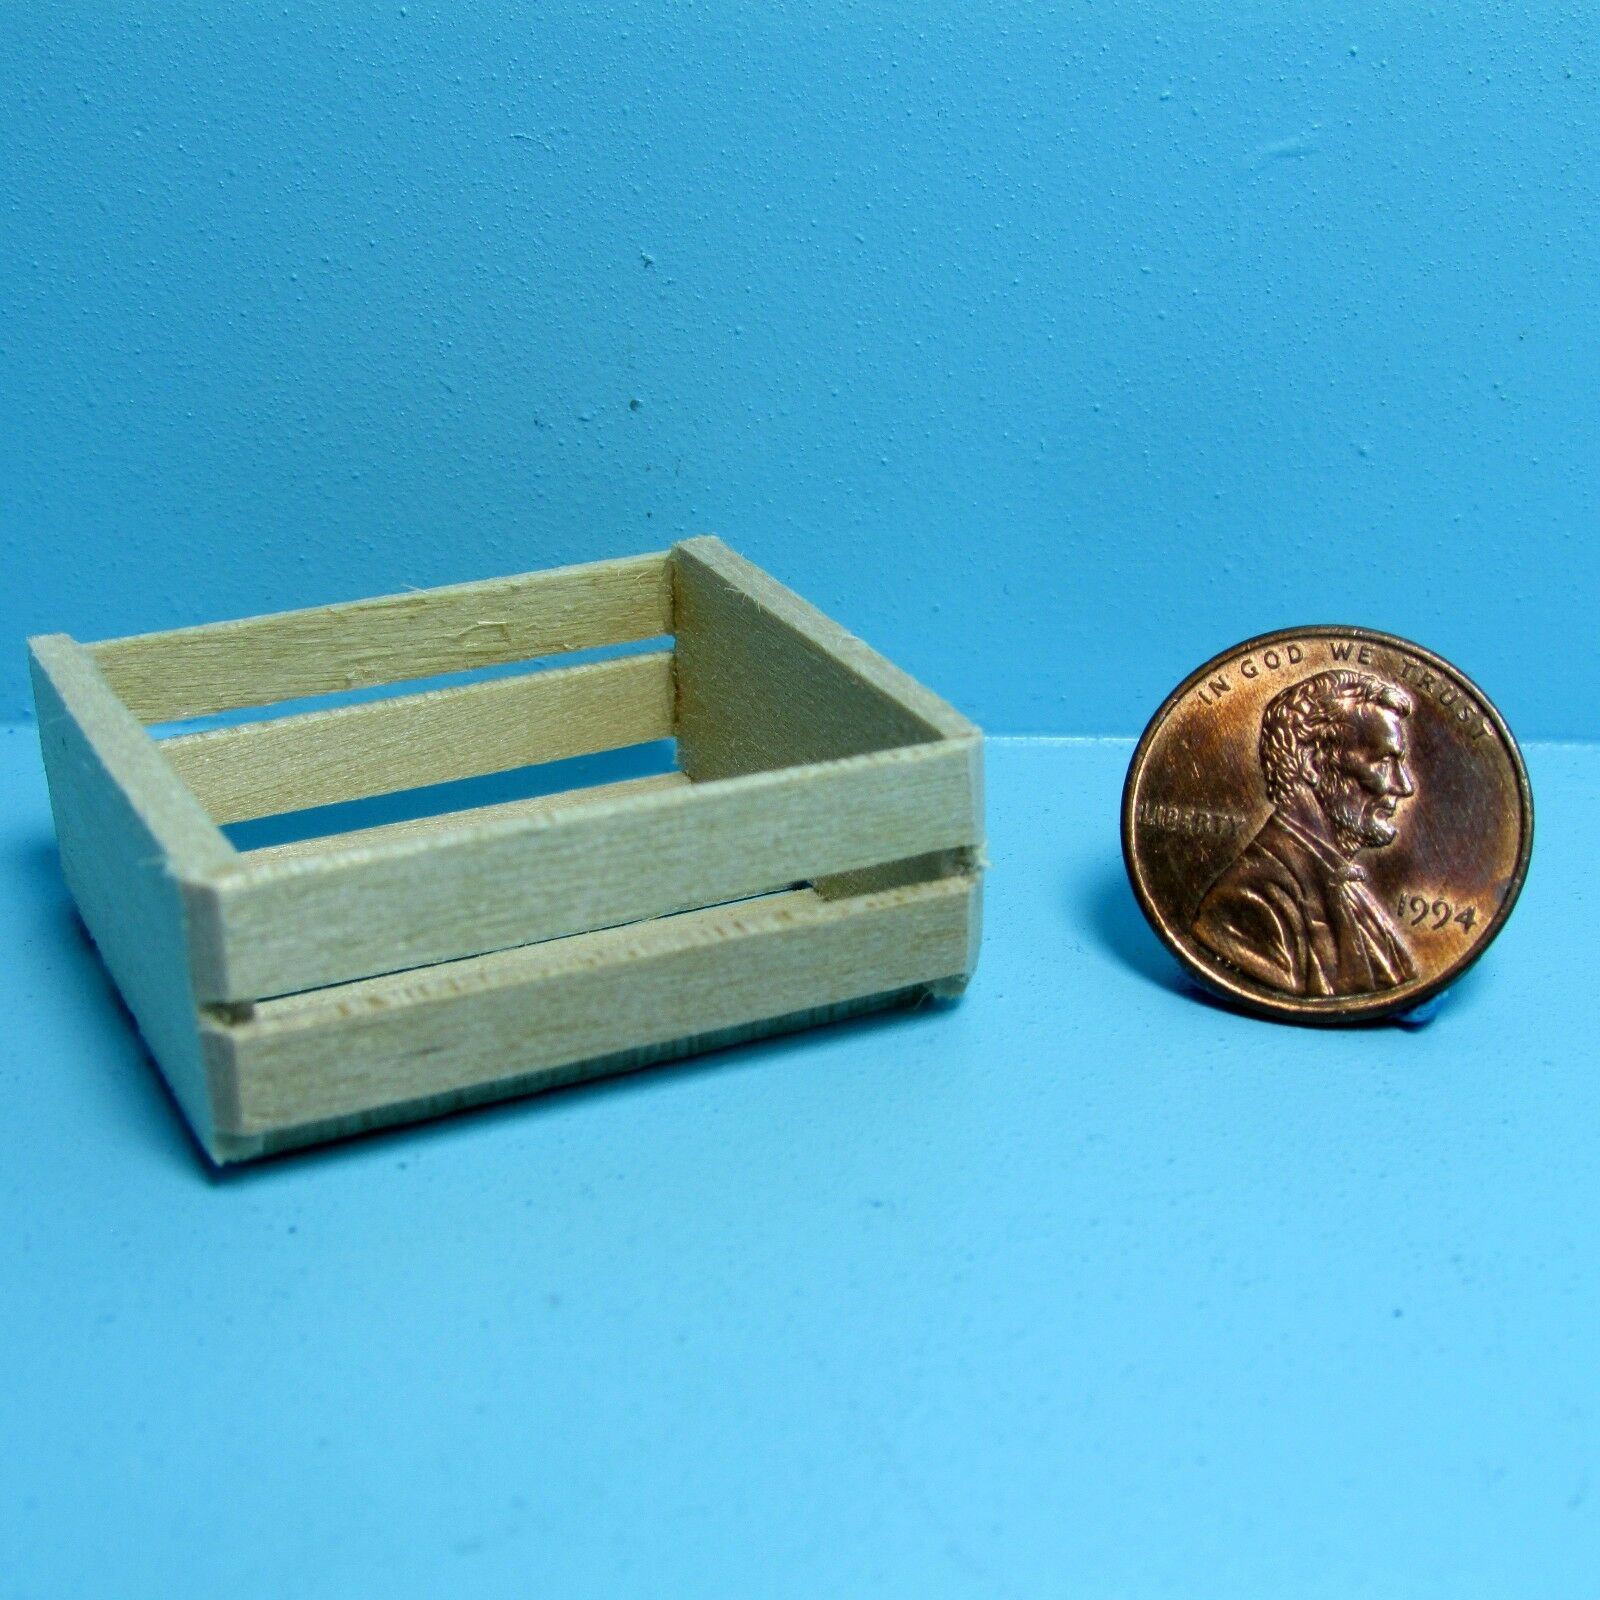 Dollhouse Miniature Small Single Wood Crate For Store Farm Market Wo503sps